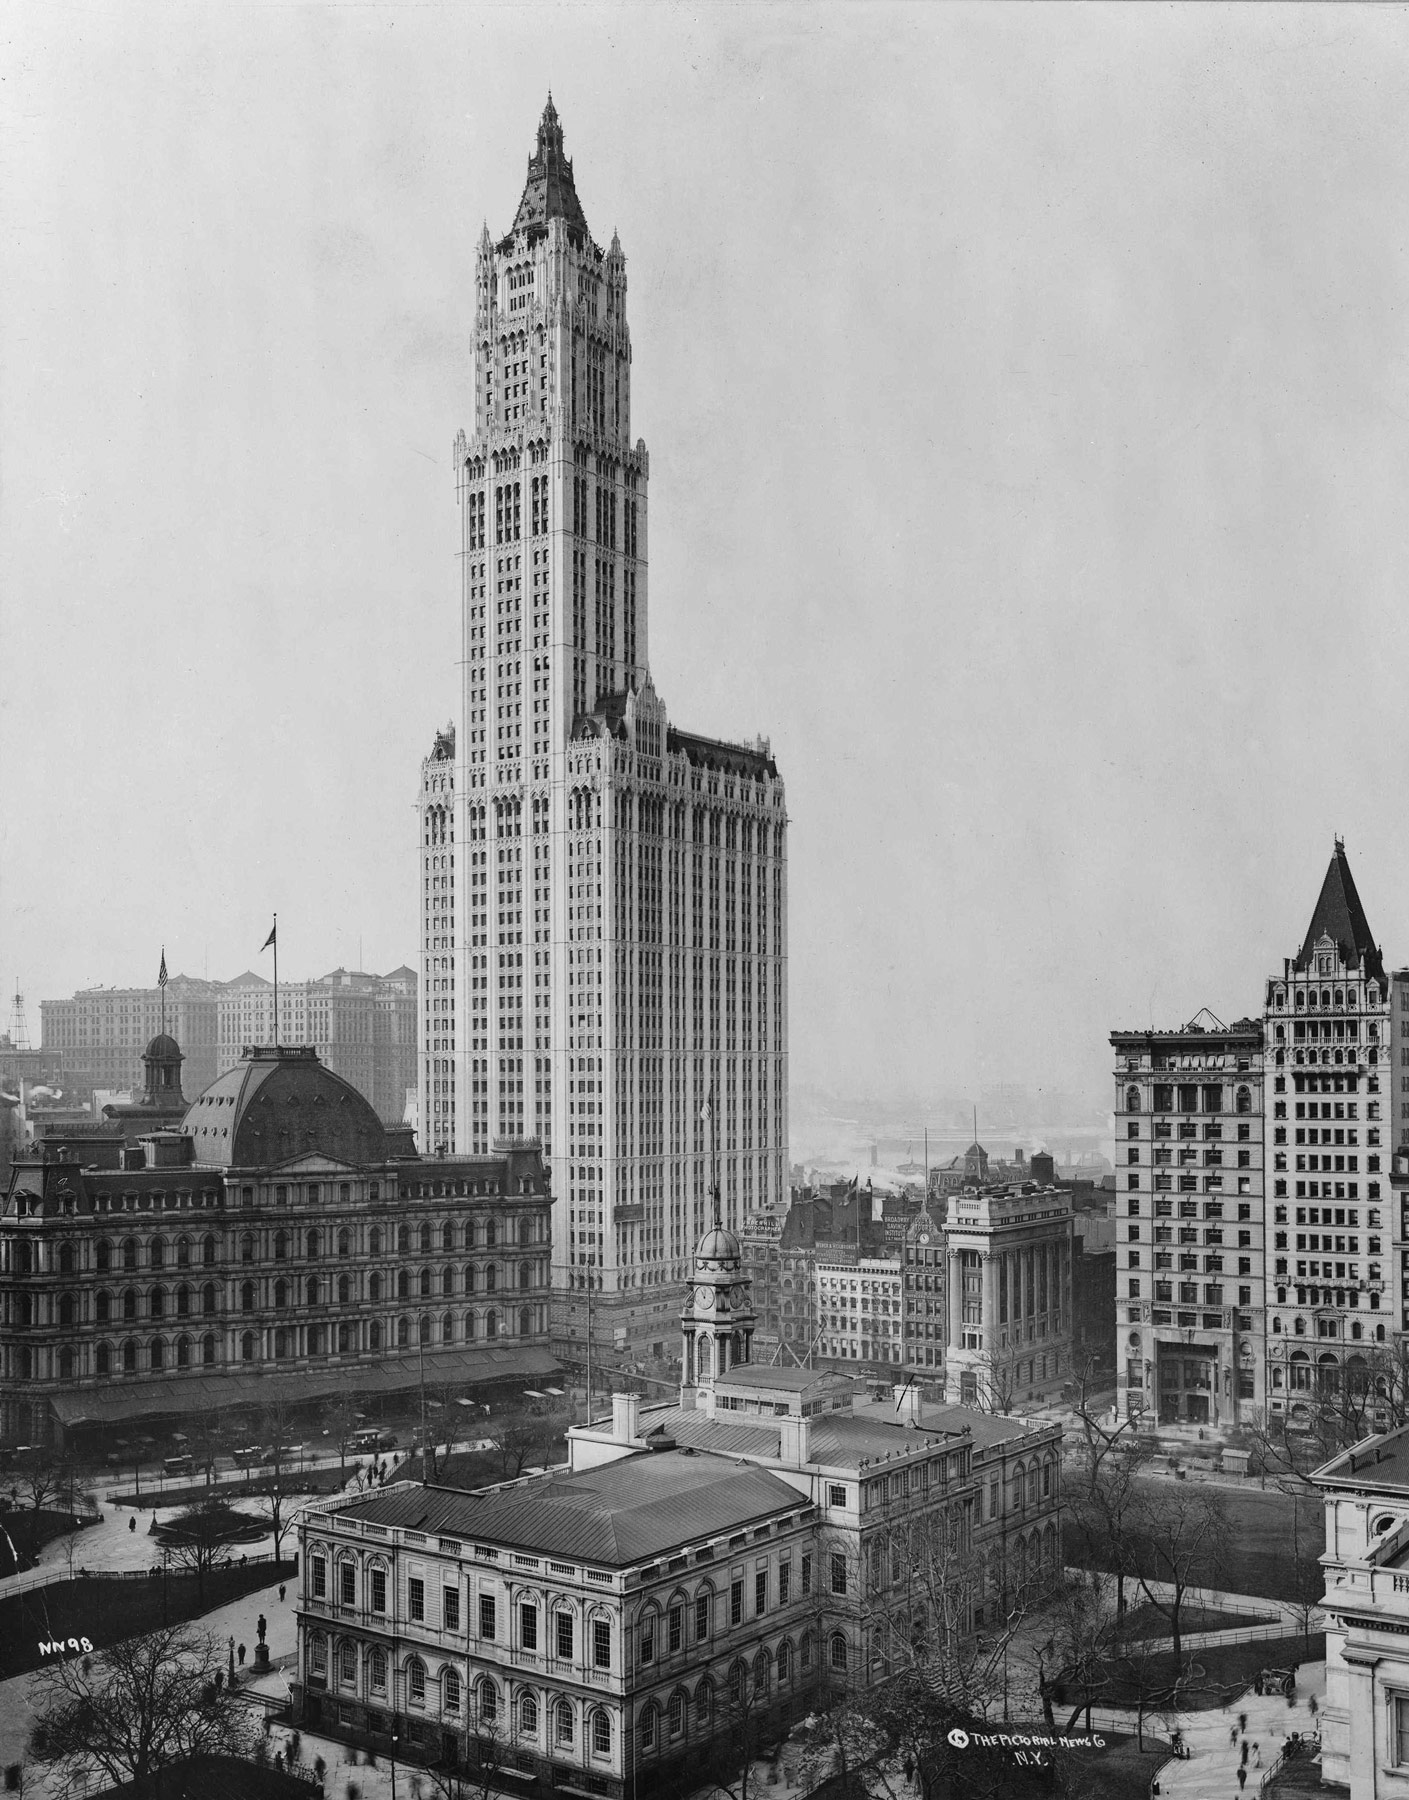 Woolworth Building. (Courtesy Library of Congress, Prints and Photographs Division / The Pictorial News Co., NY)